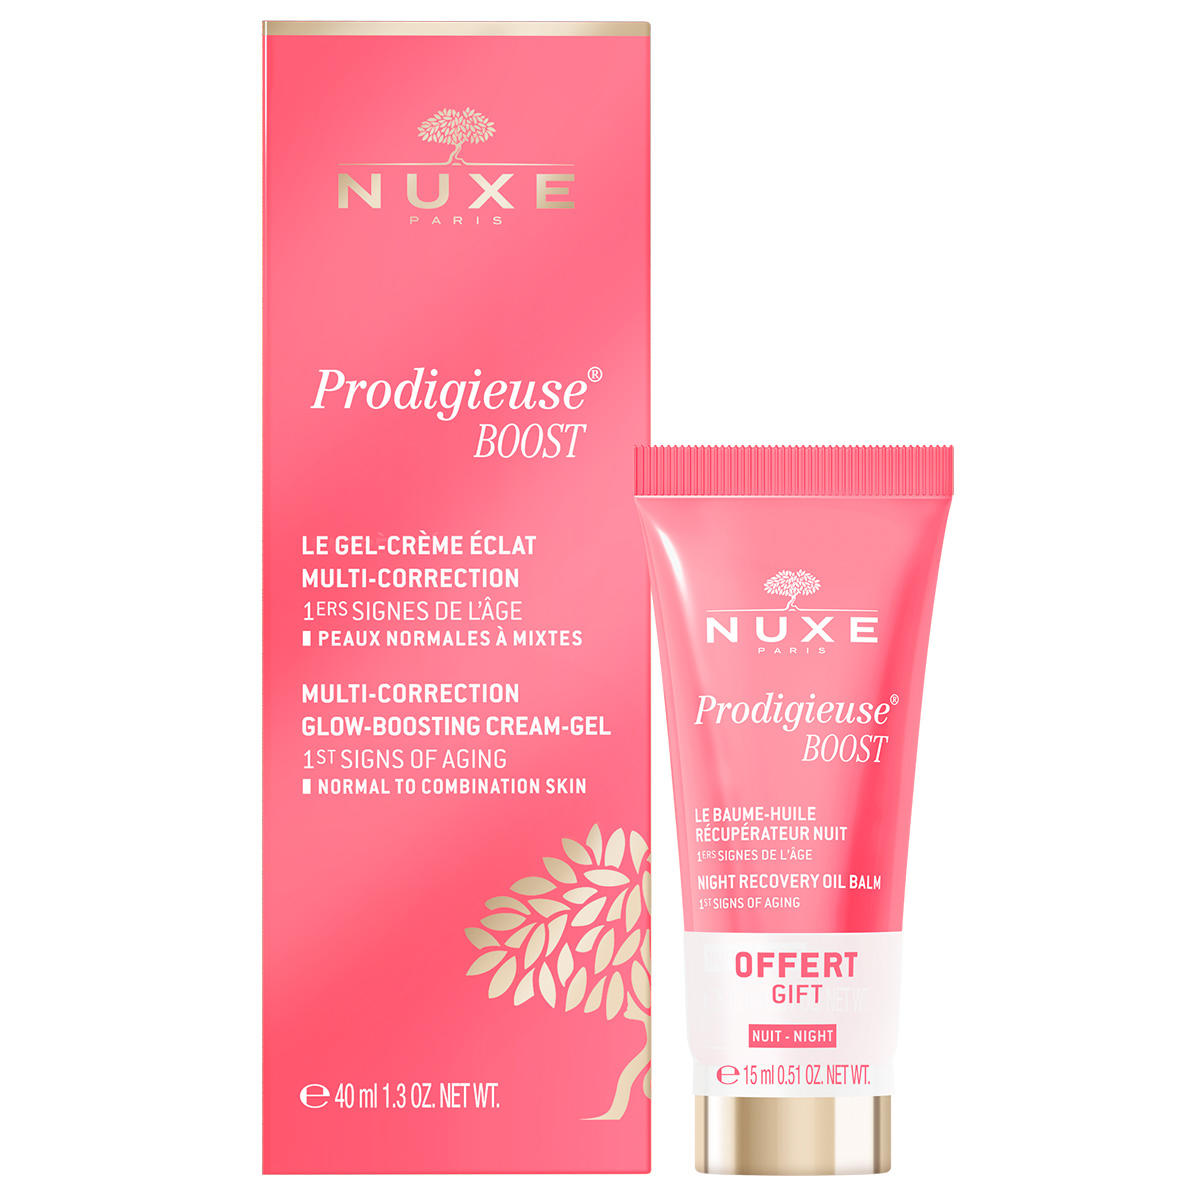 NUXE Prodigieuse BOOST Cream-Gel and Oil Balm Set   - 1